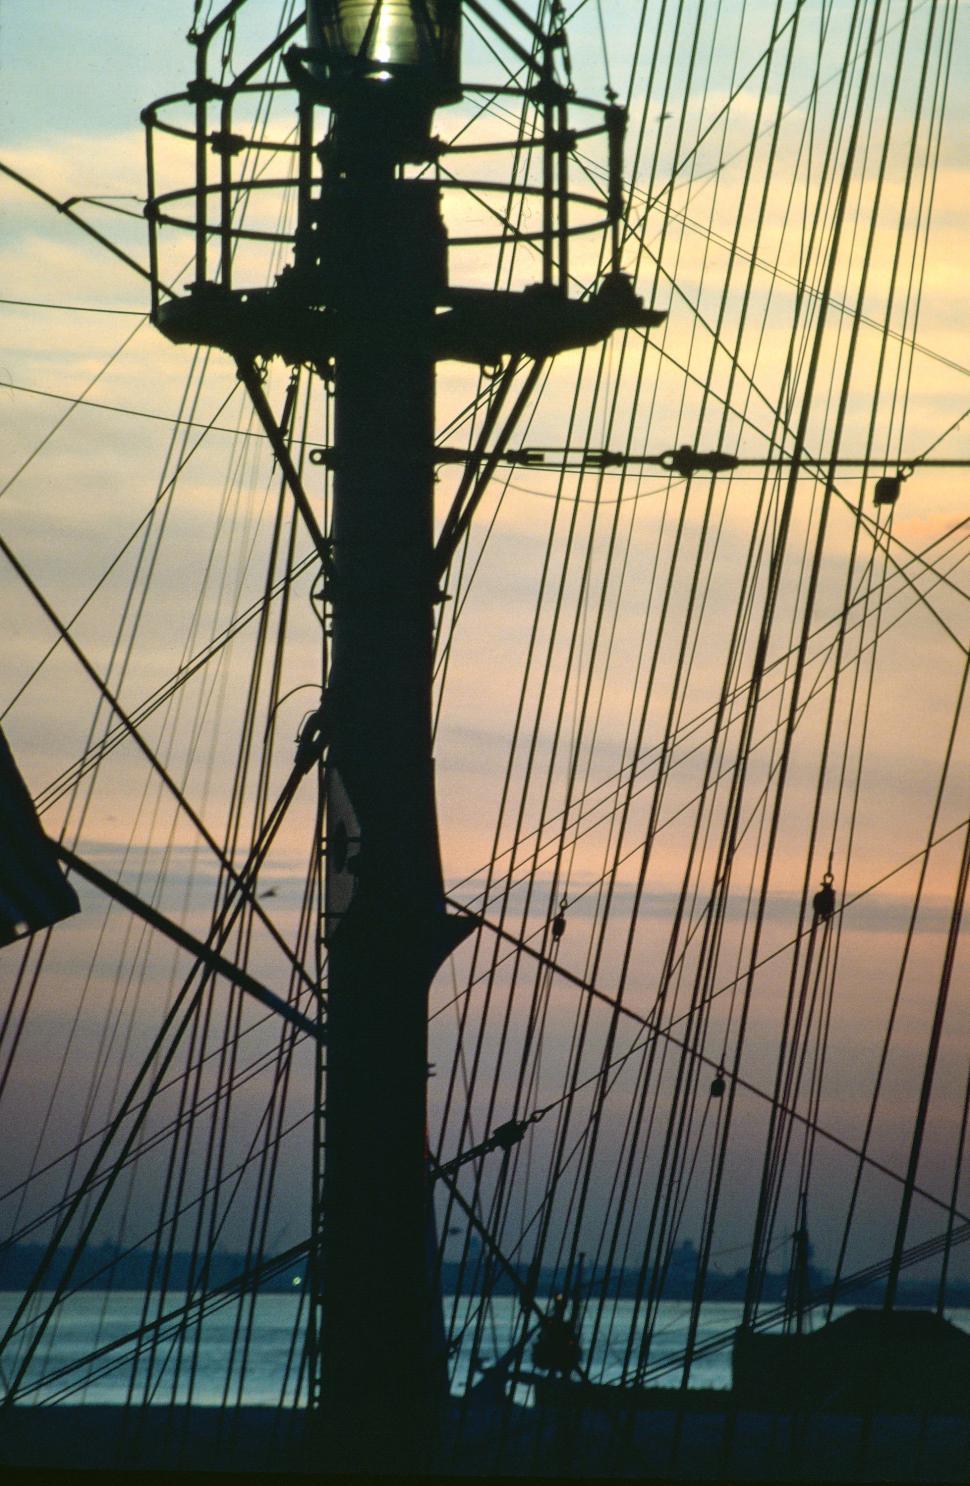 Free Image of Mast and Rig of a ship 